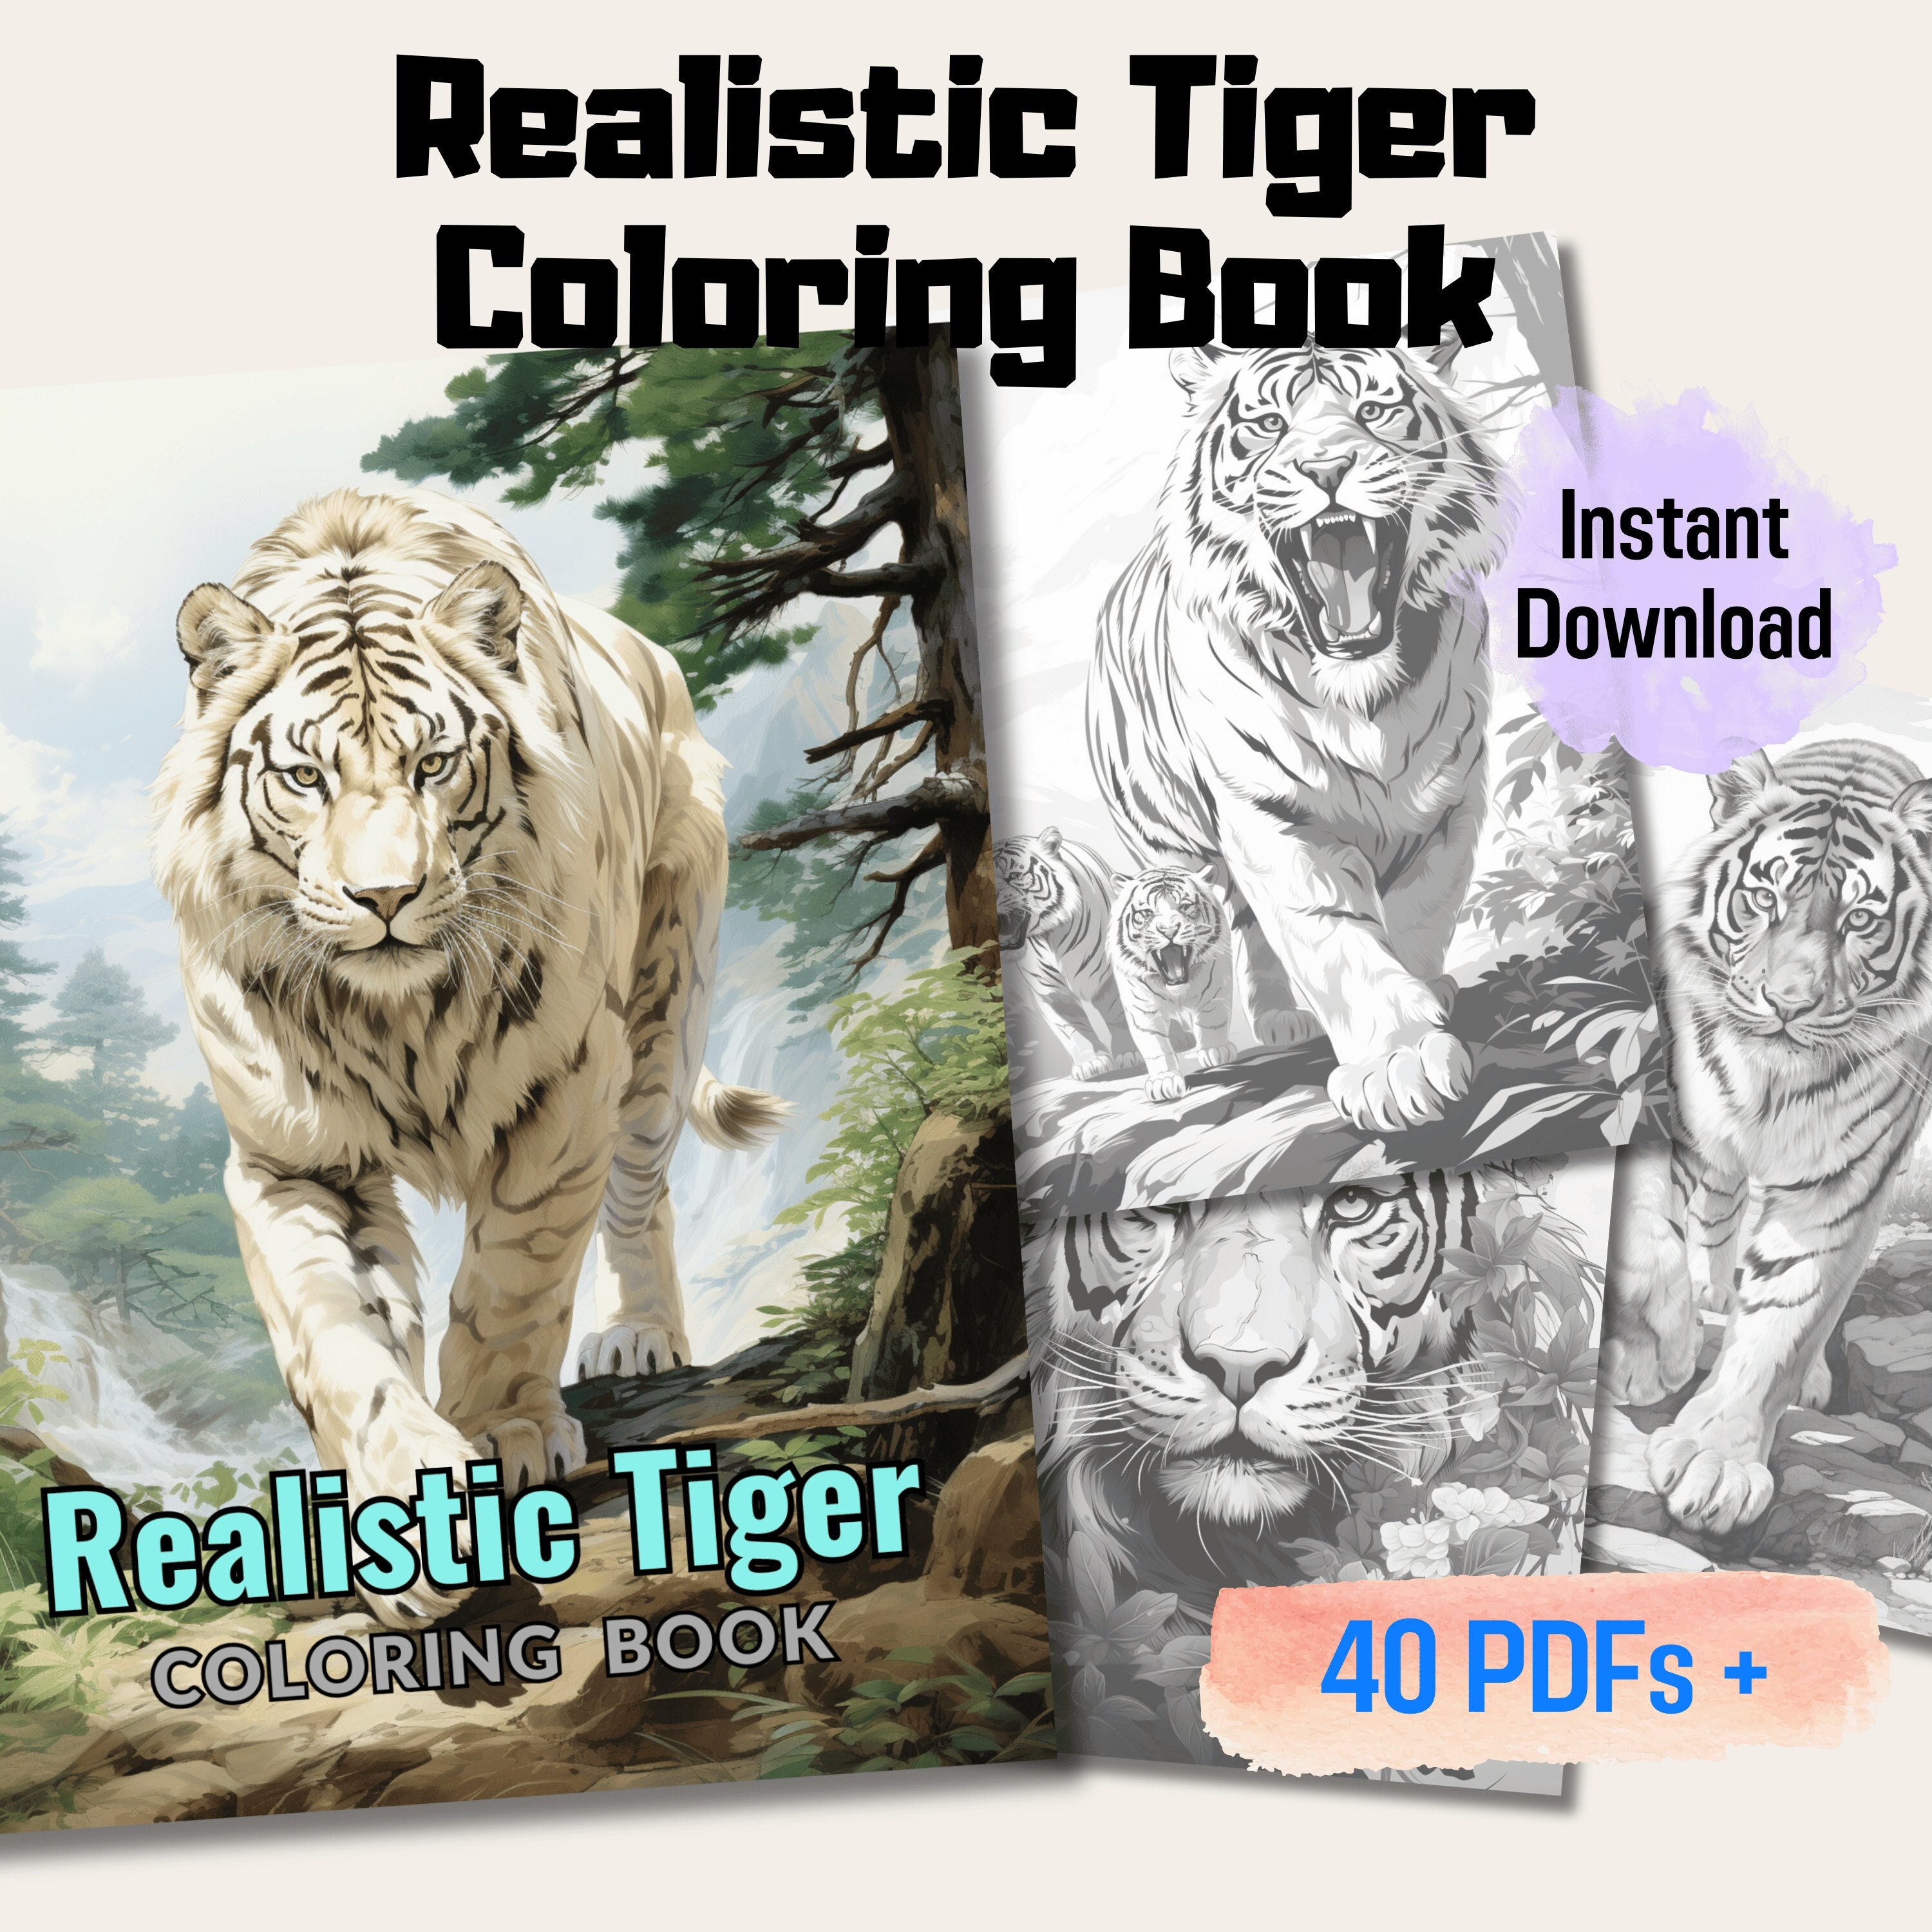 Realistic tiger grayscale coloring book perfect for relaxation and mindfulness instant download pdf stress relief for all ages